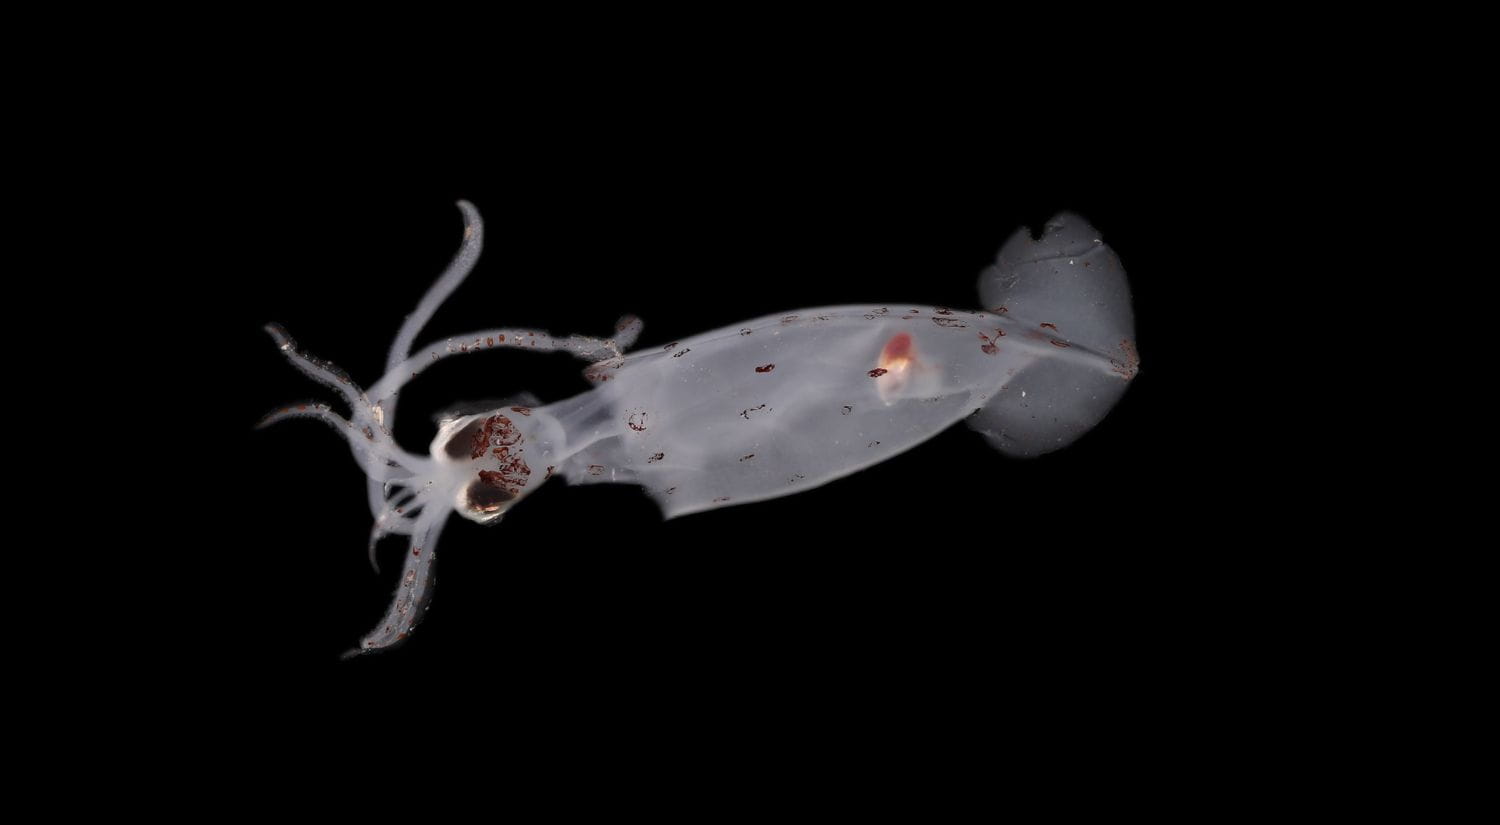 A new squid species 